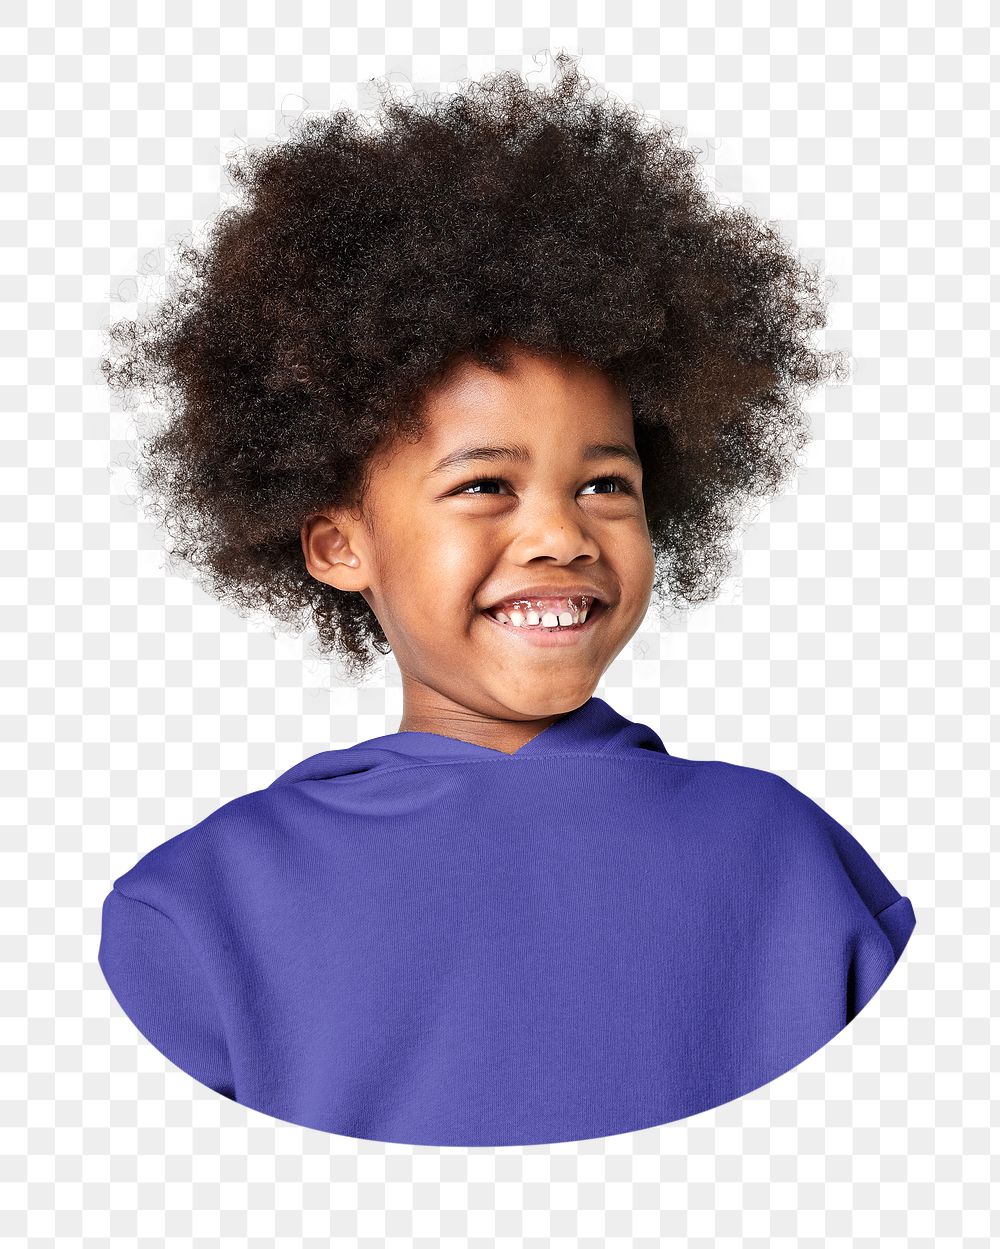 Happy png African Amercian child,  transparent background